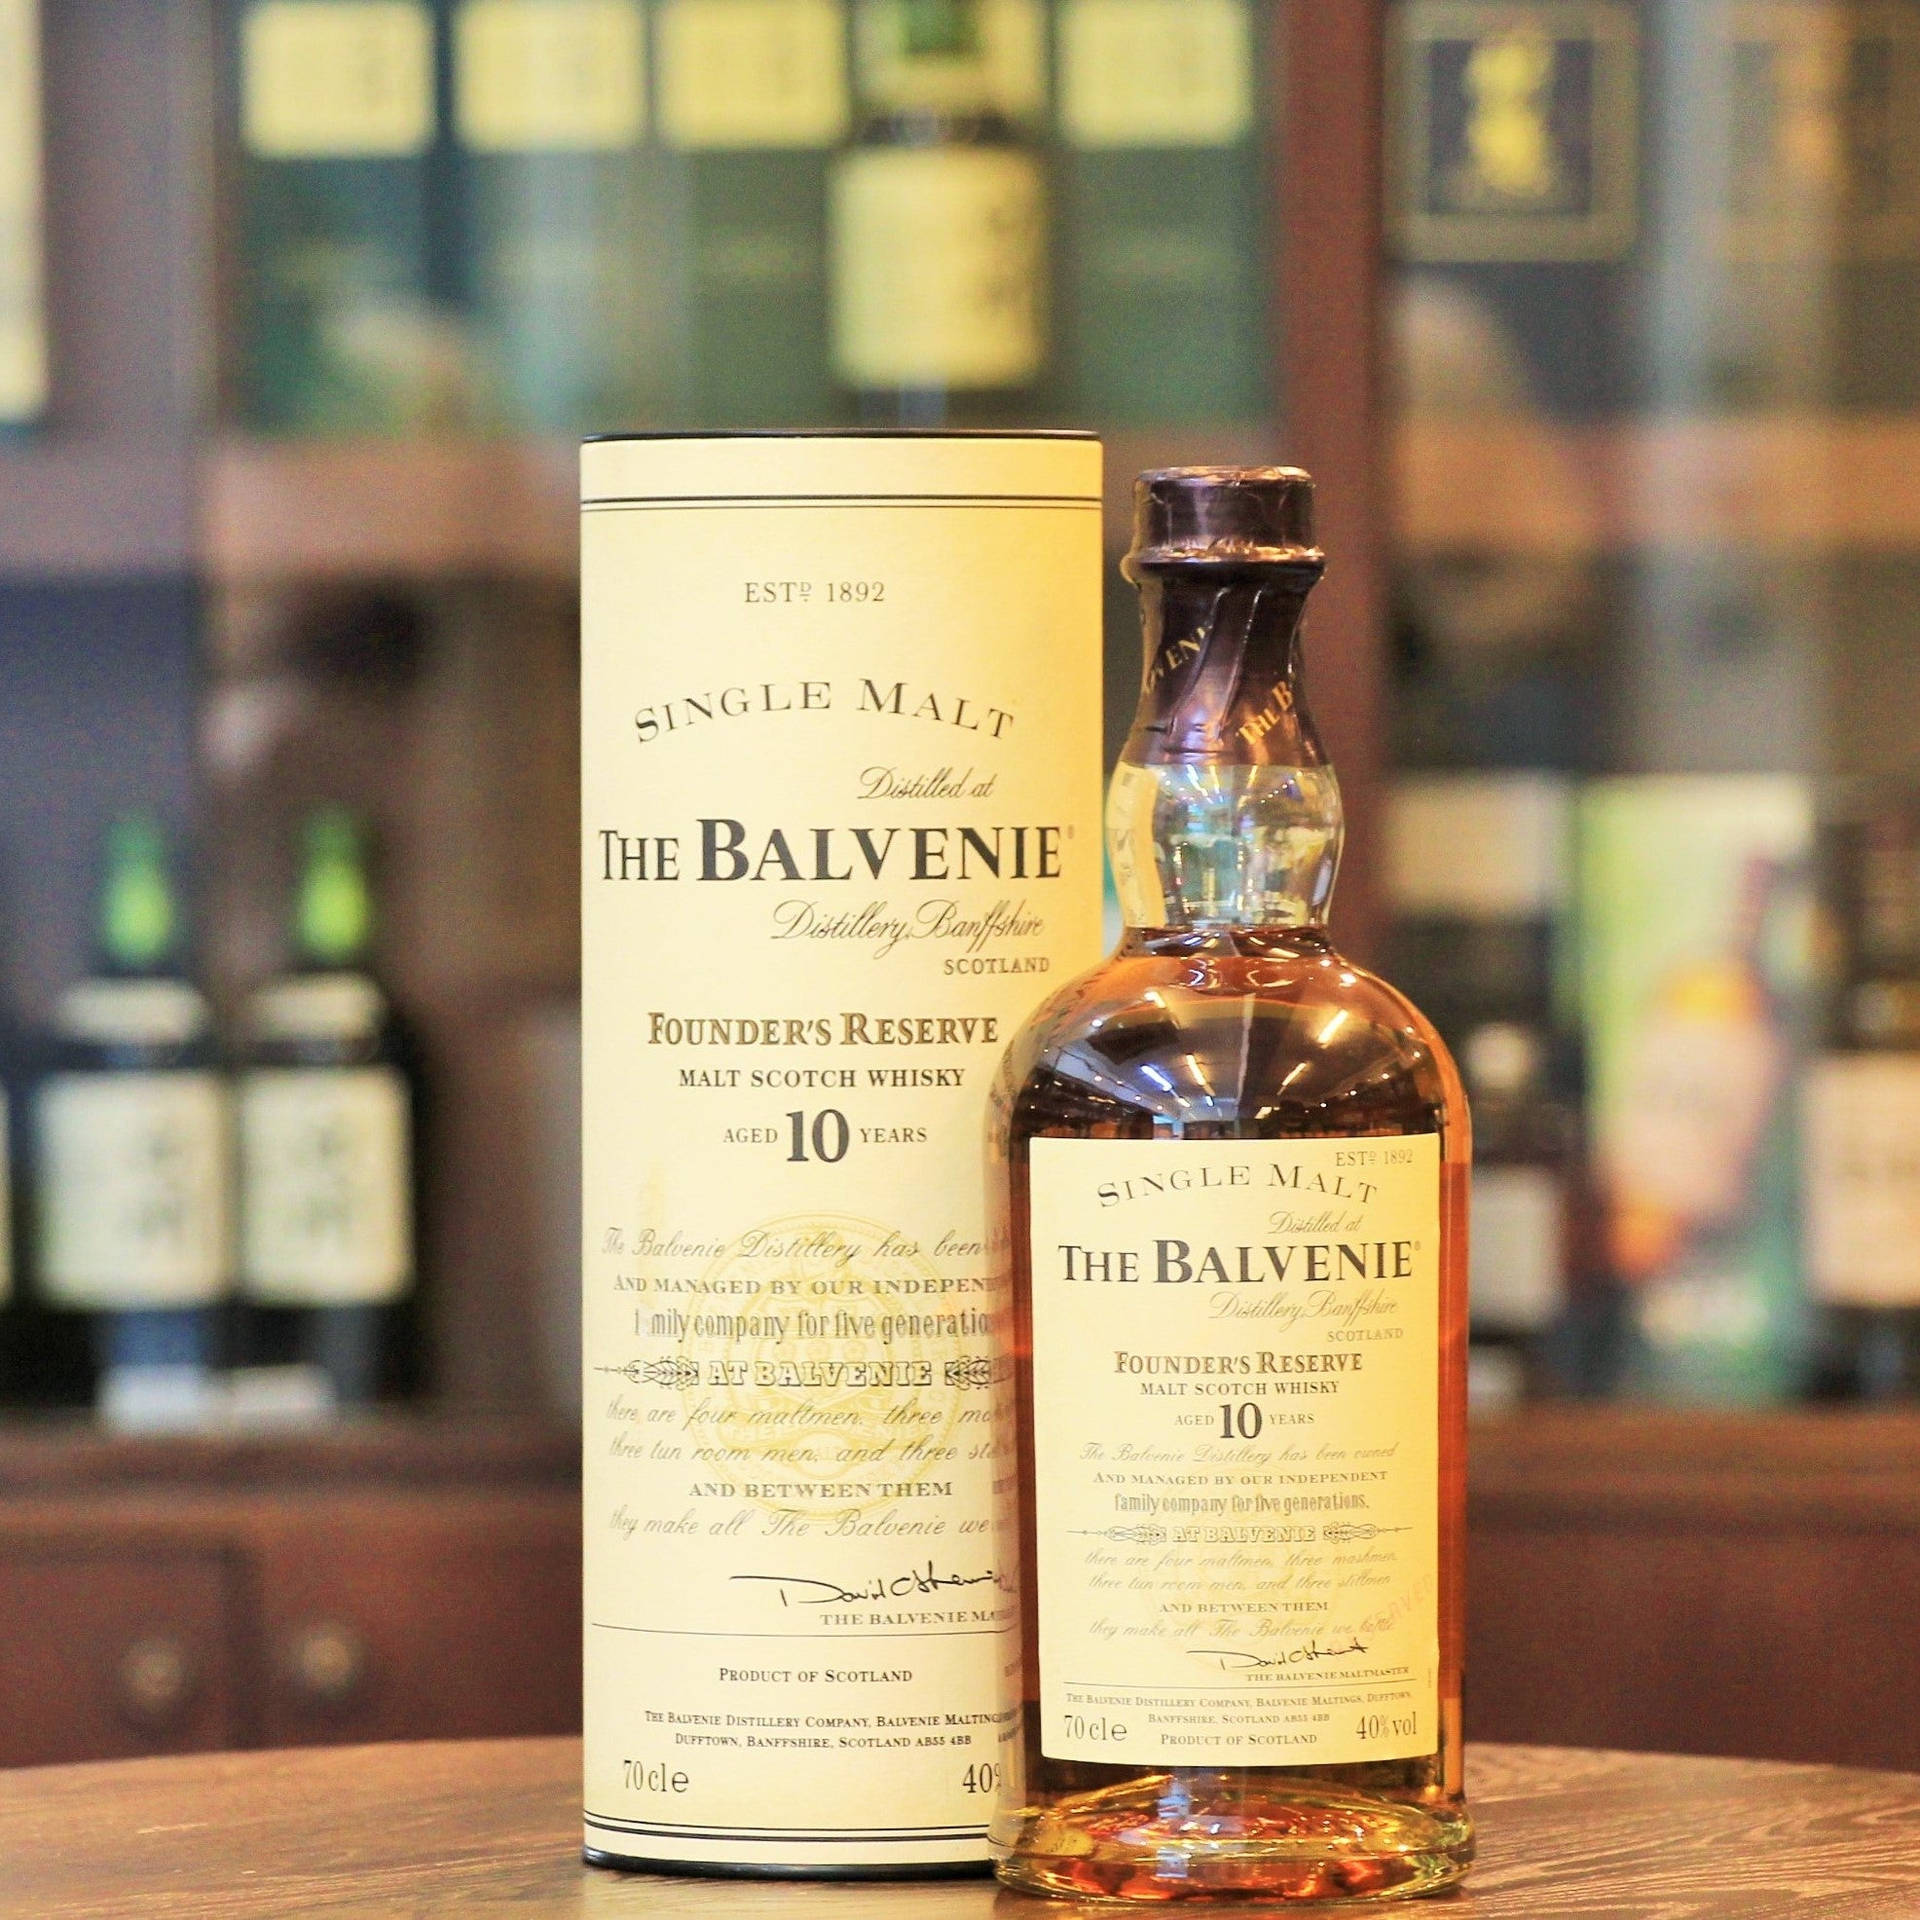 The Balvenie Founder’s Reserve 10 Year Old Scotch Whisky Wallpaper